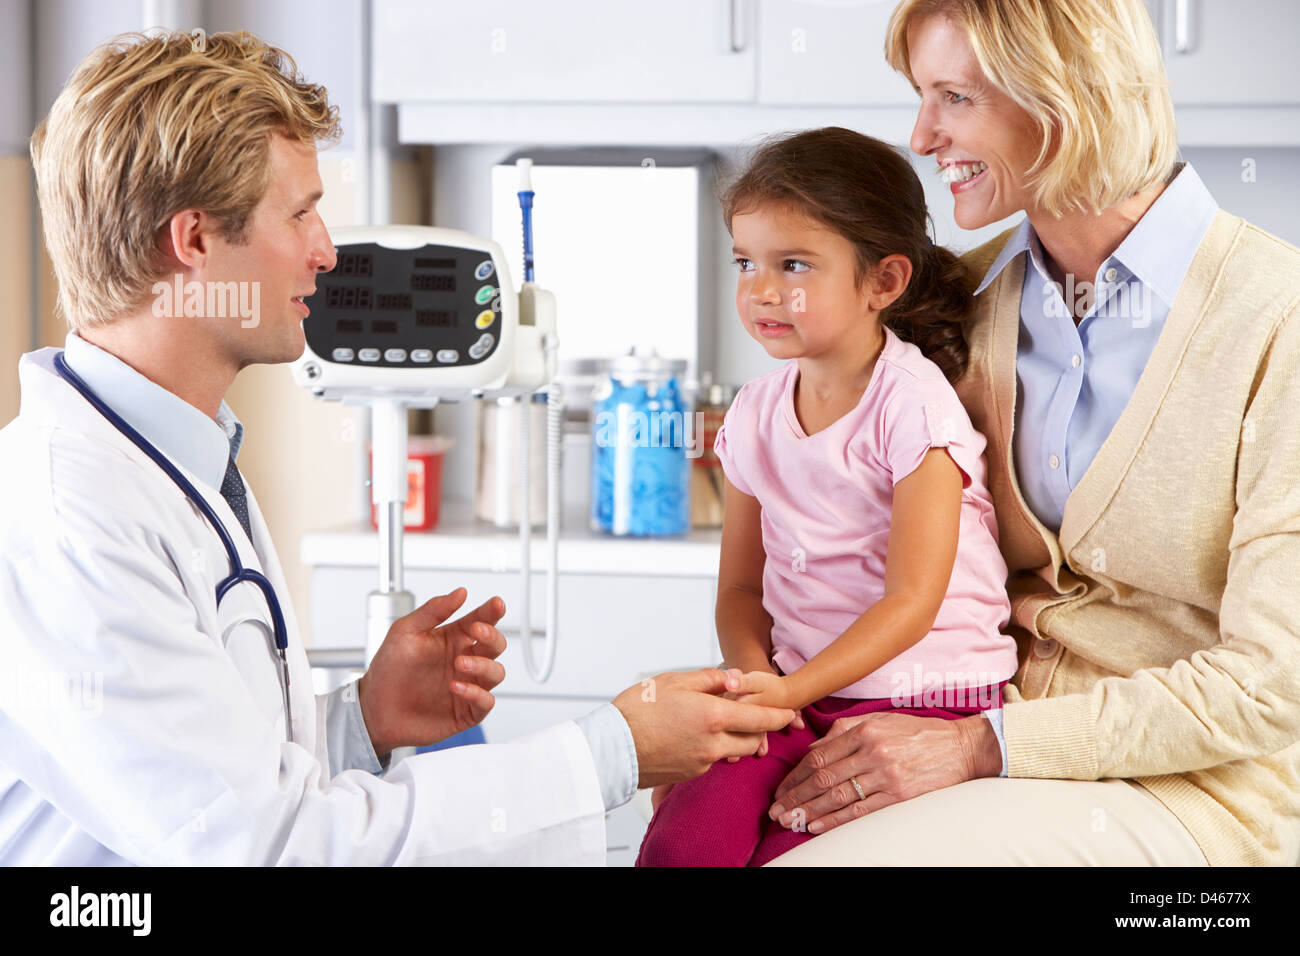 Mother And Child Visiting Doctor's Office Stock Photo - Alamy